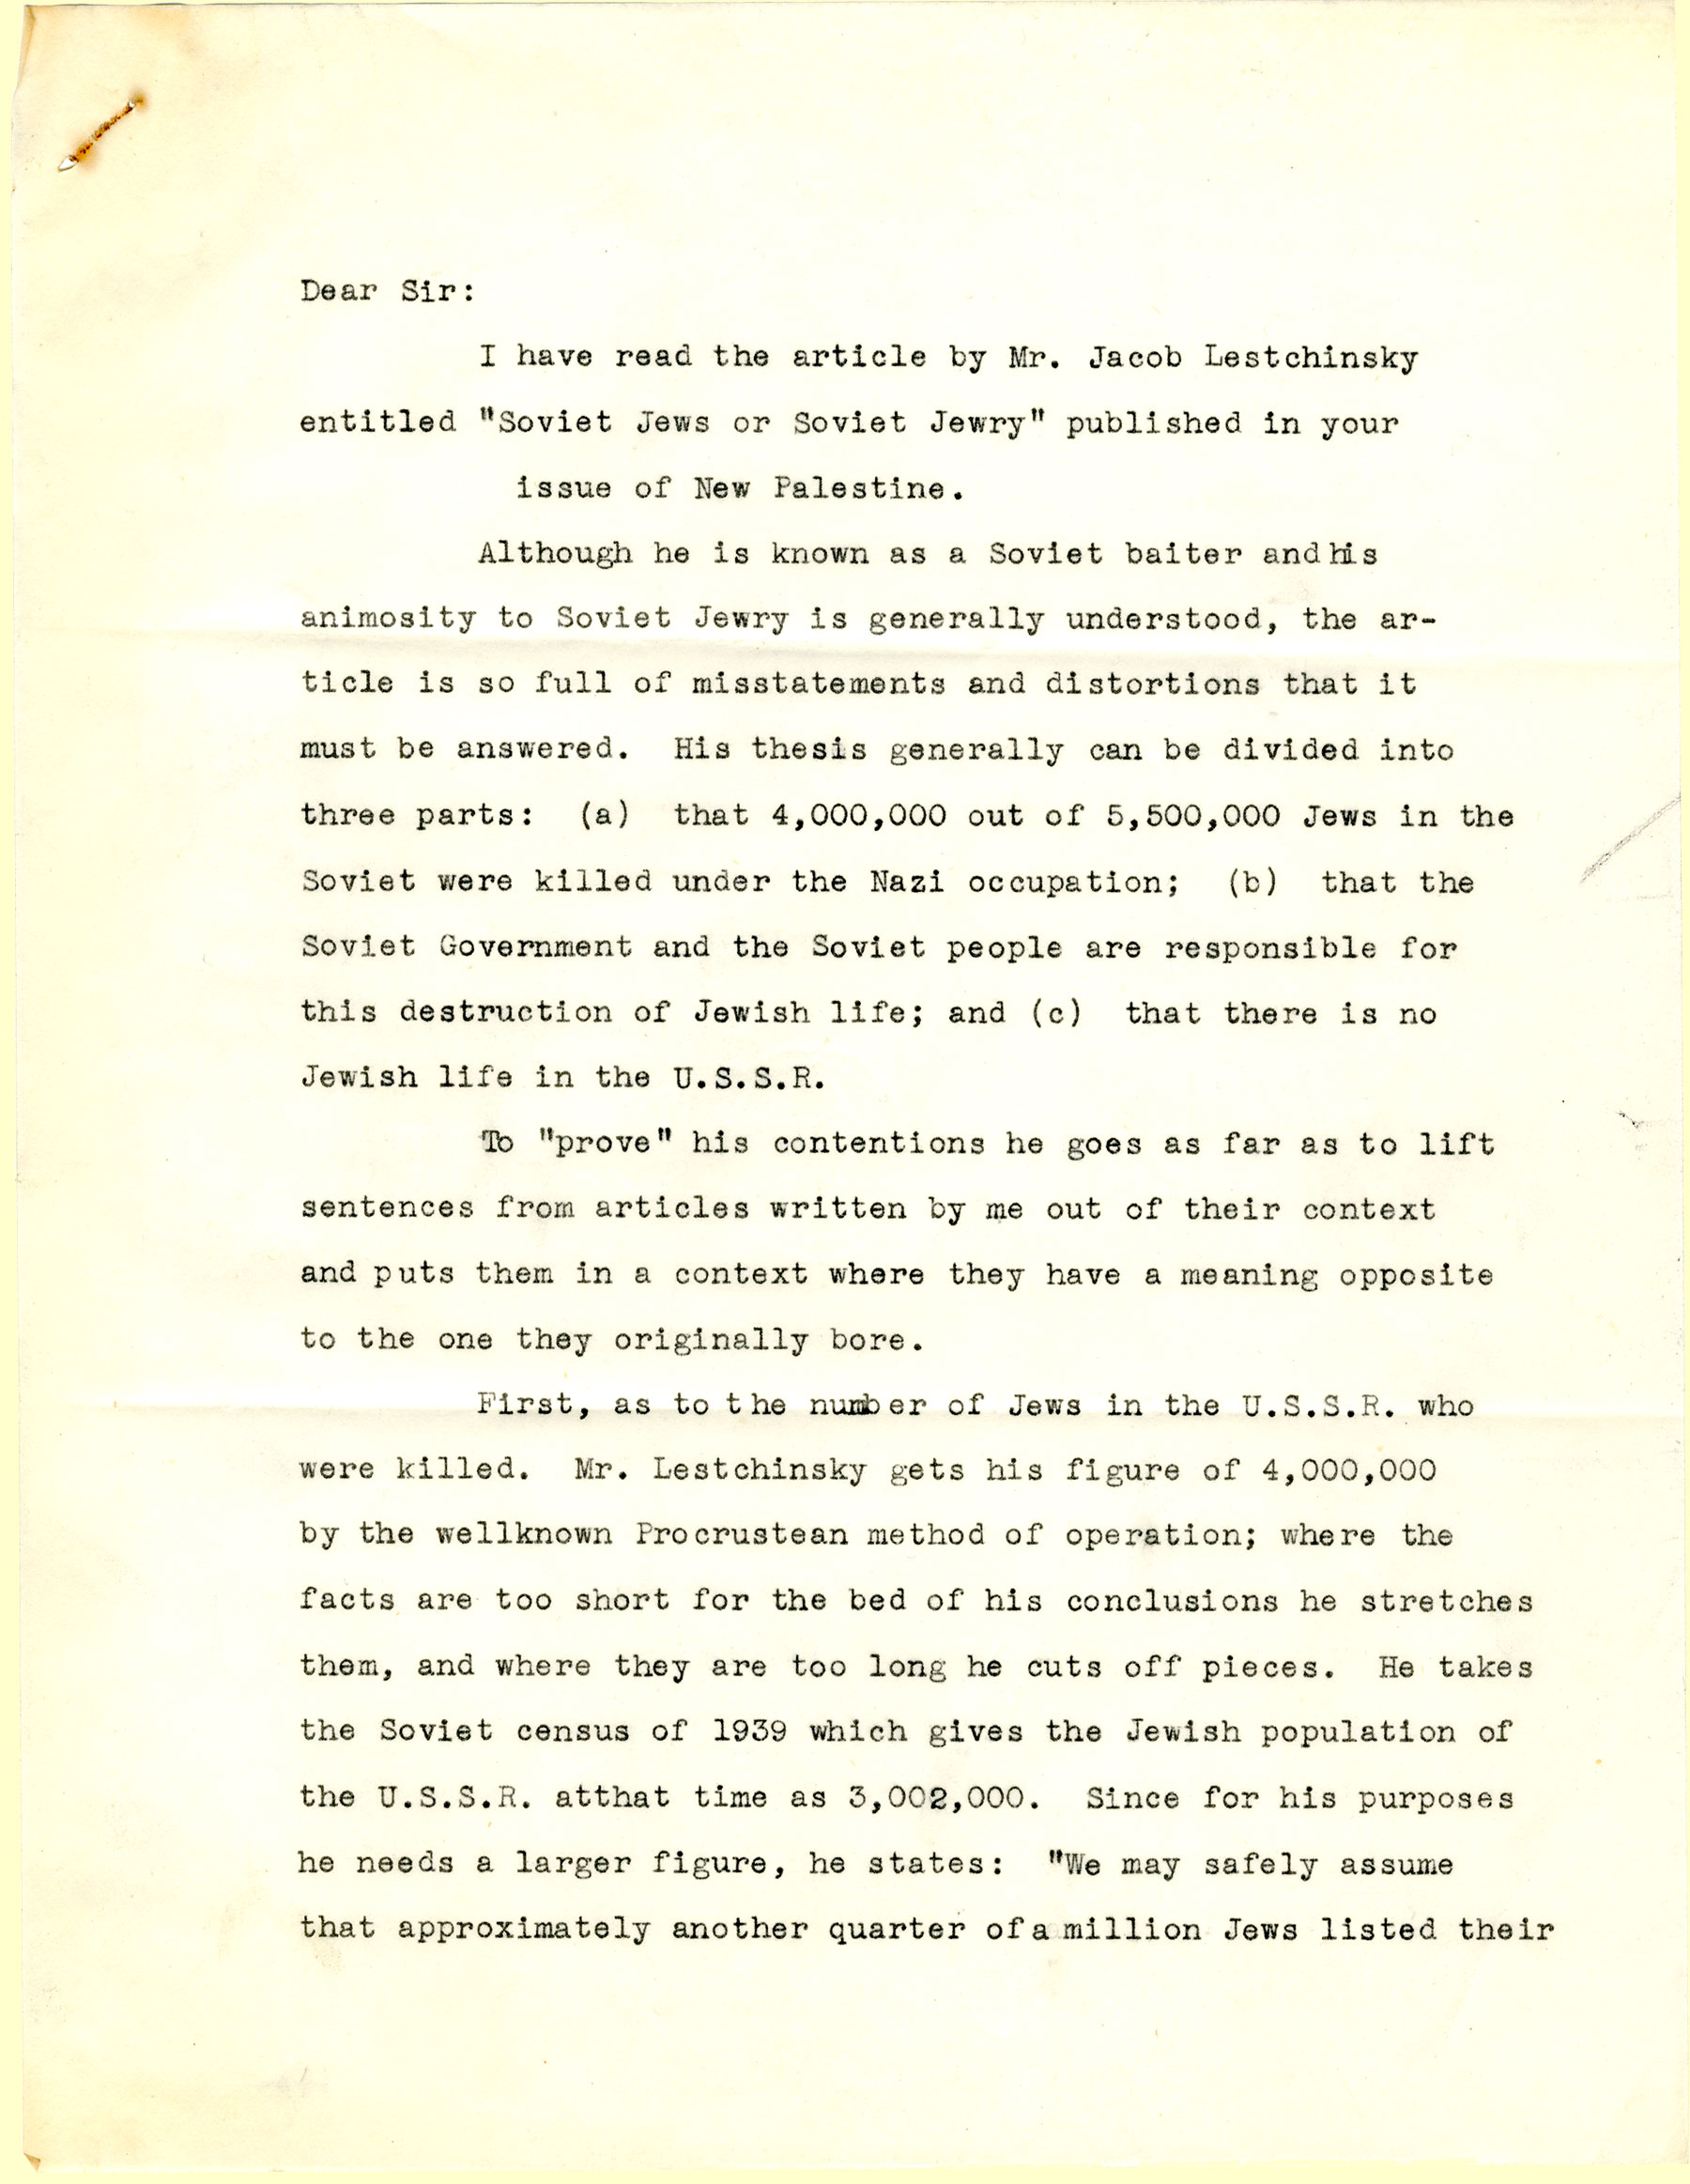 B.Z. Goldberg's letter to The New Palestine, page 1